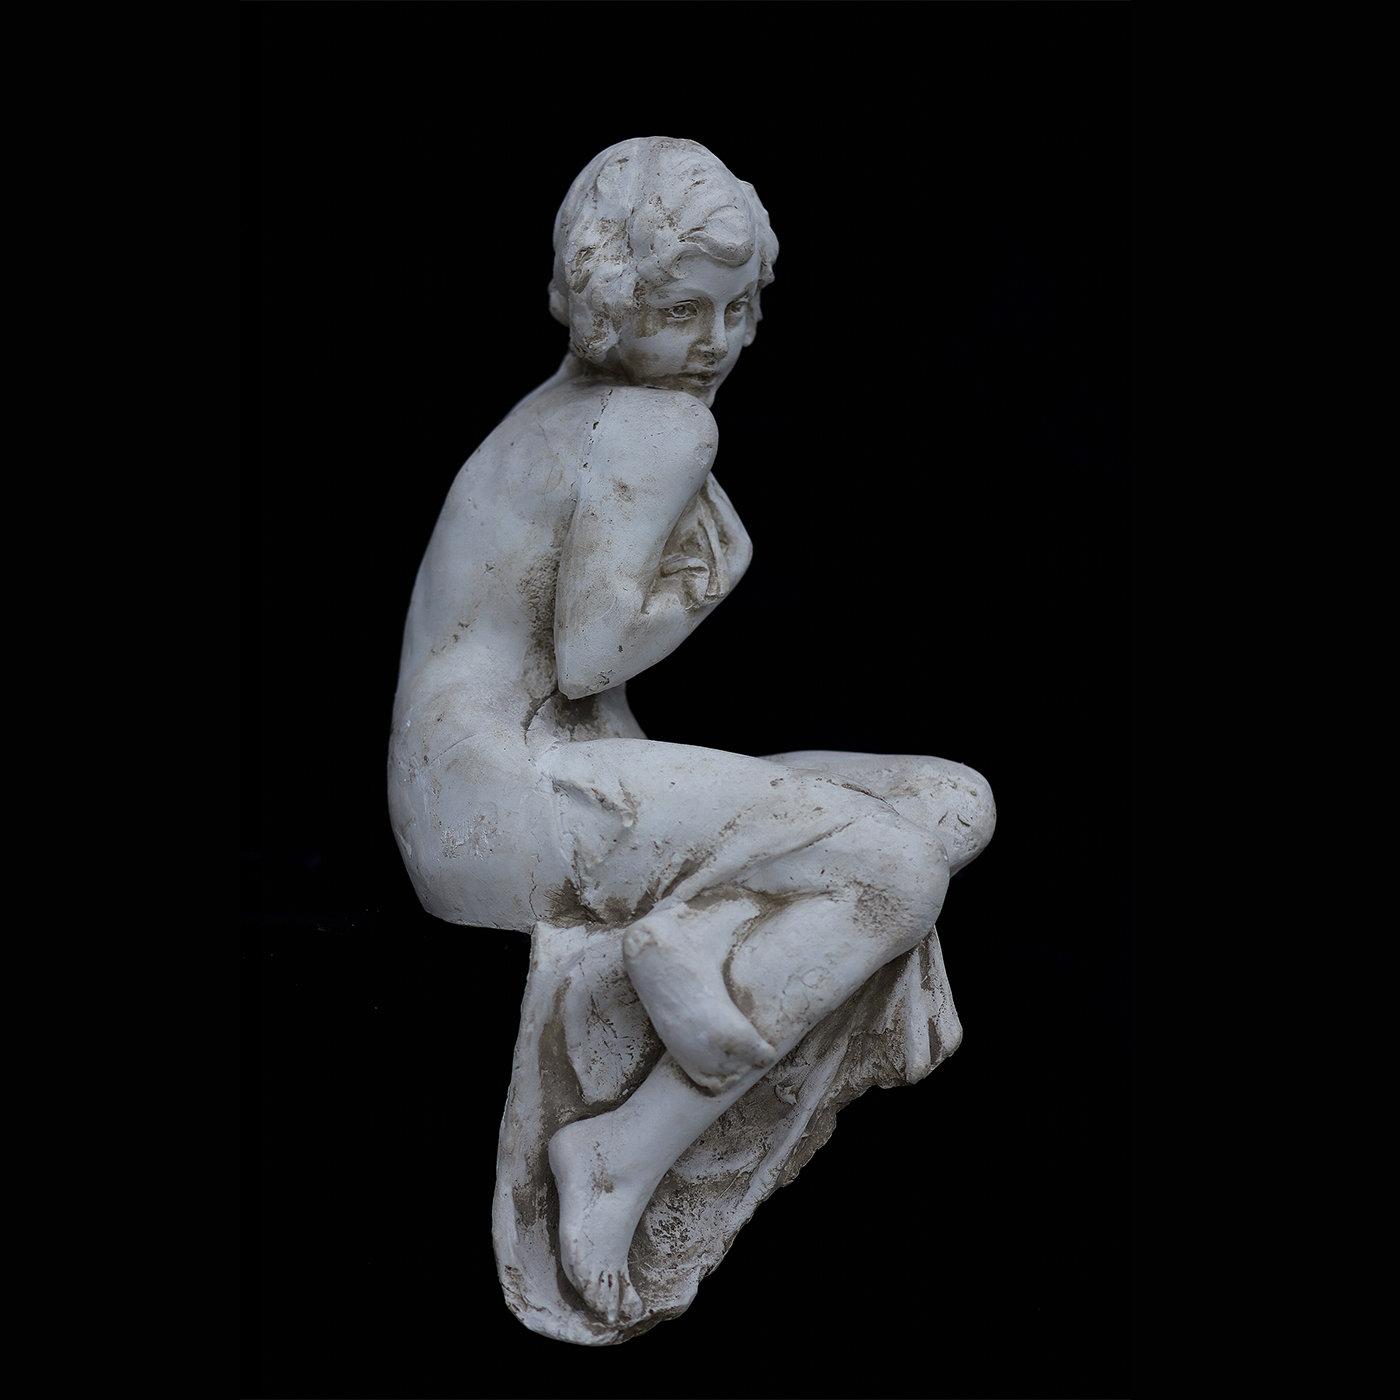 This extraordinary sculpture merges art and design in a unique showcase of craftsmanship that will stunningly elevate the aesthetic of any interior. Handmade of gypsum by Romanelli's artists, it depicts a young woman sitting on one side and rapidly